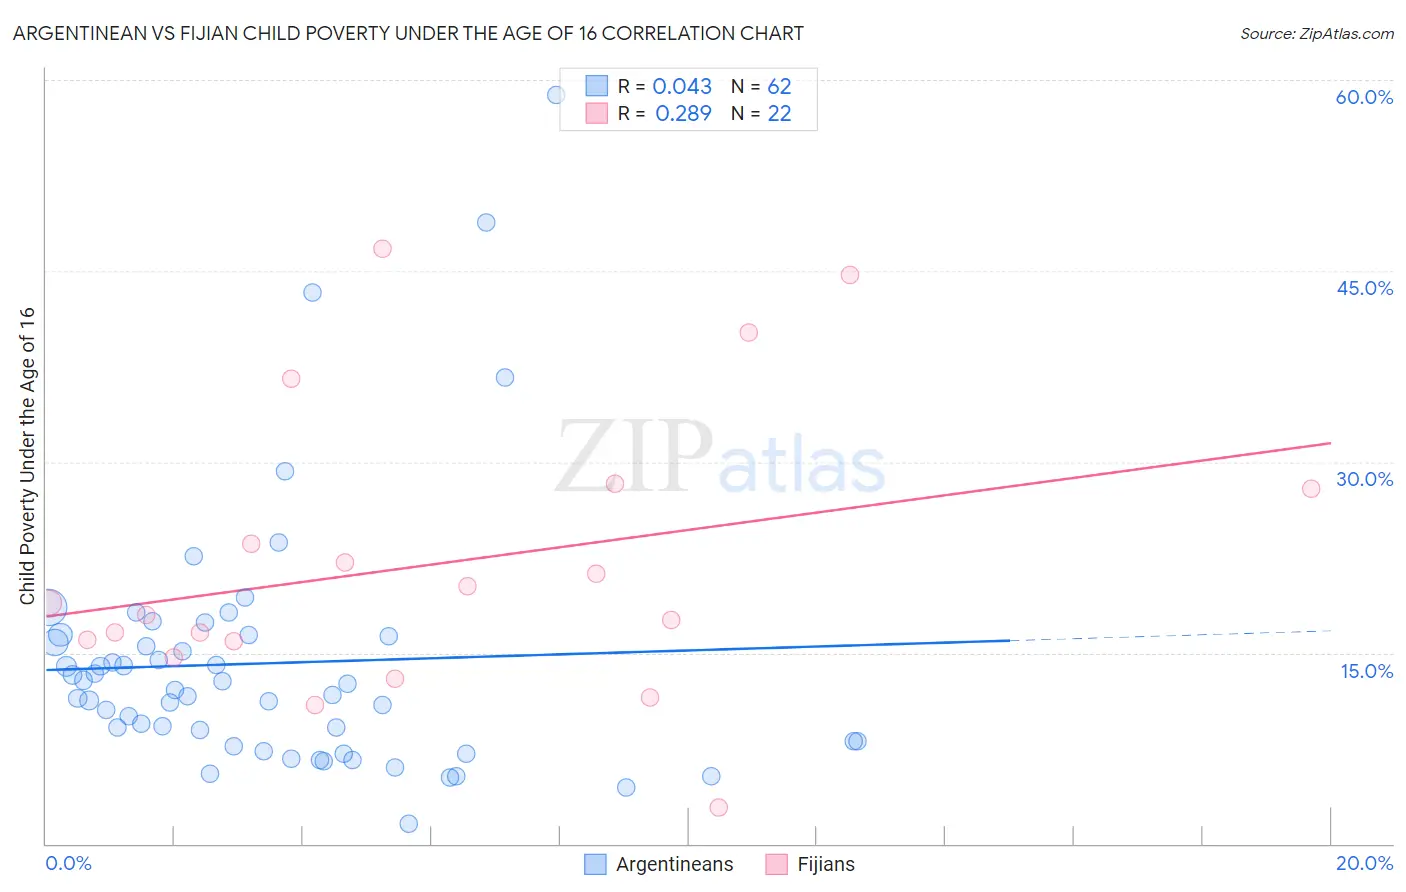 Argentinean vs Fijian Child Poverty Under the Age of 16